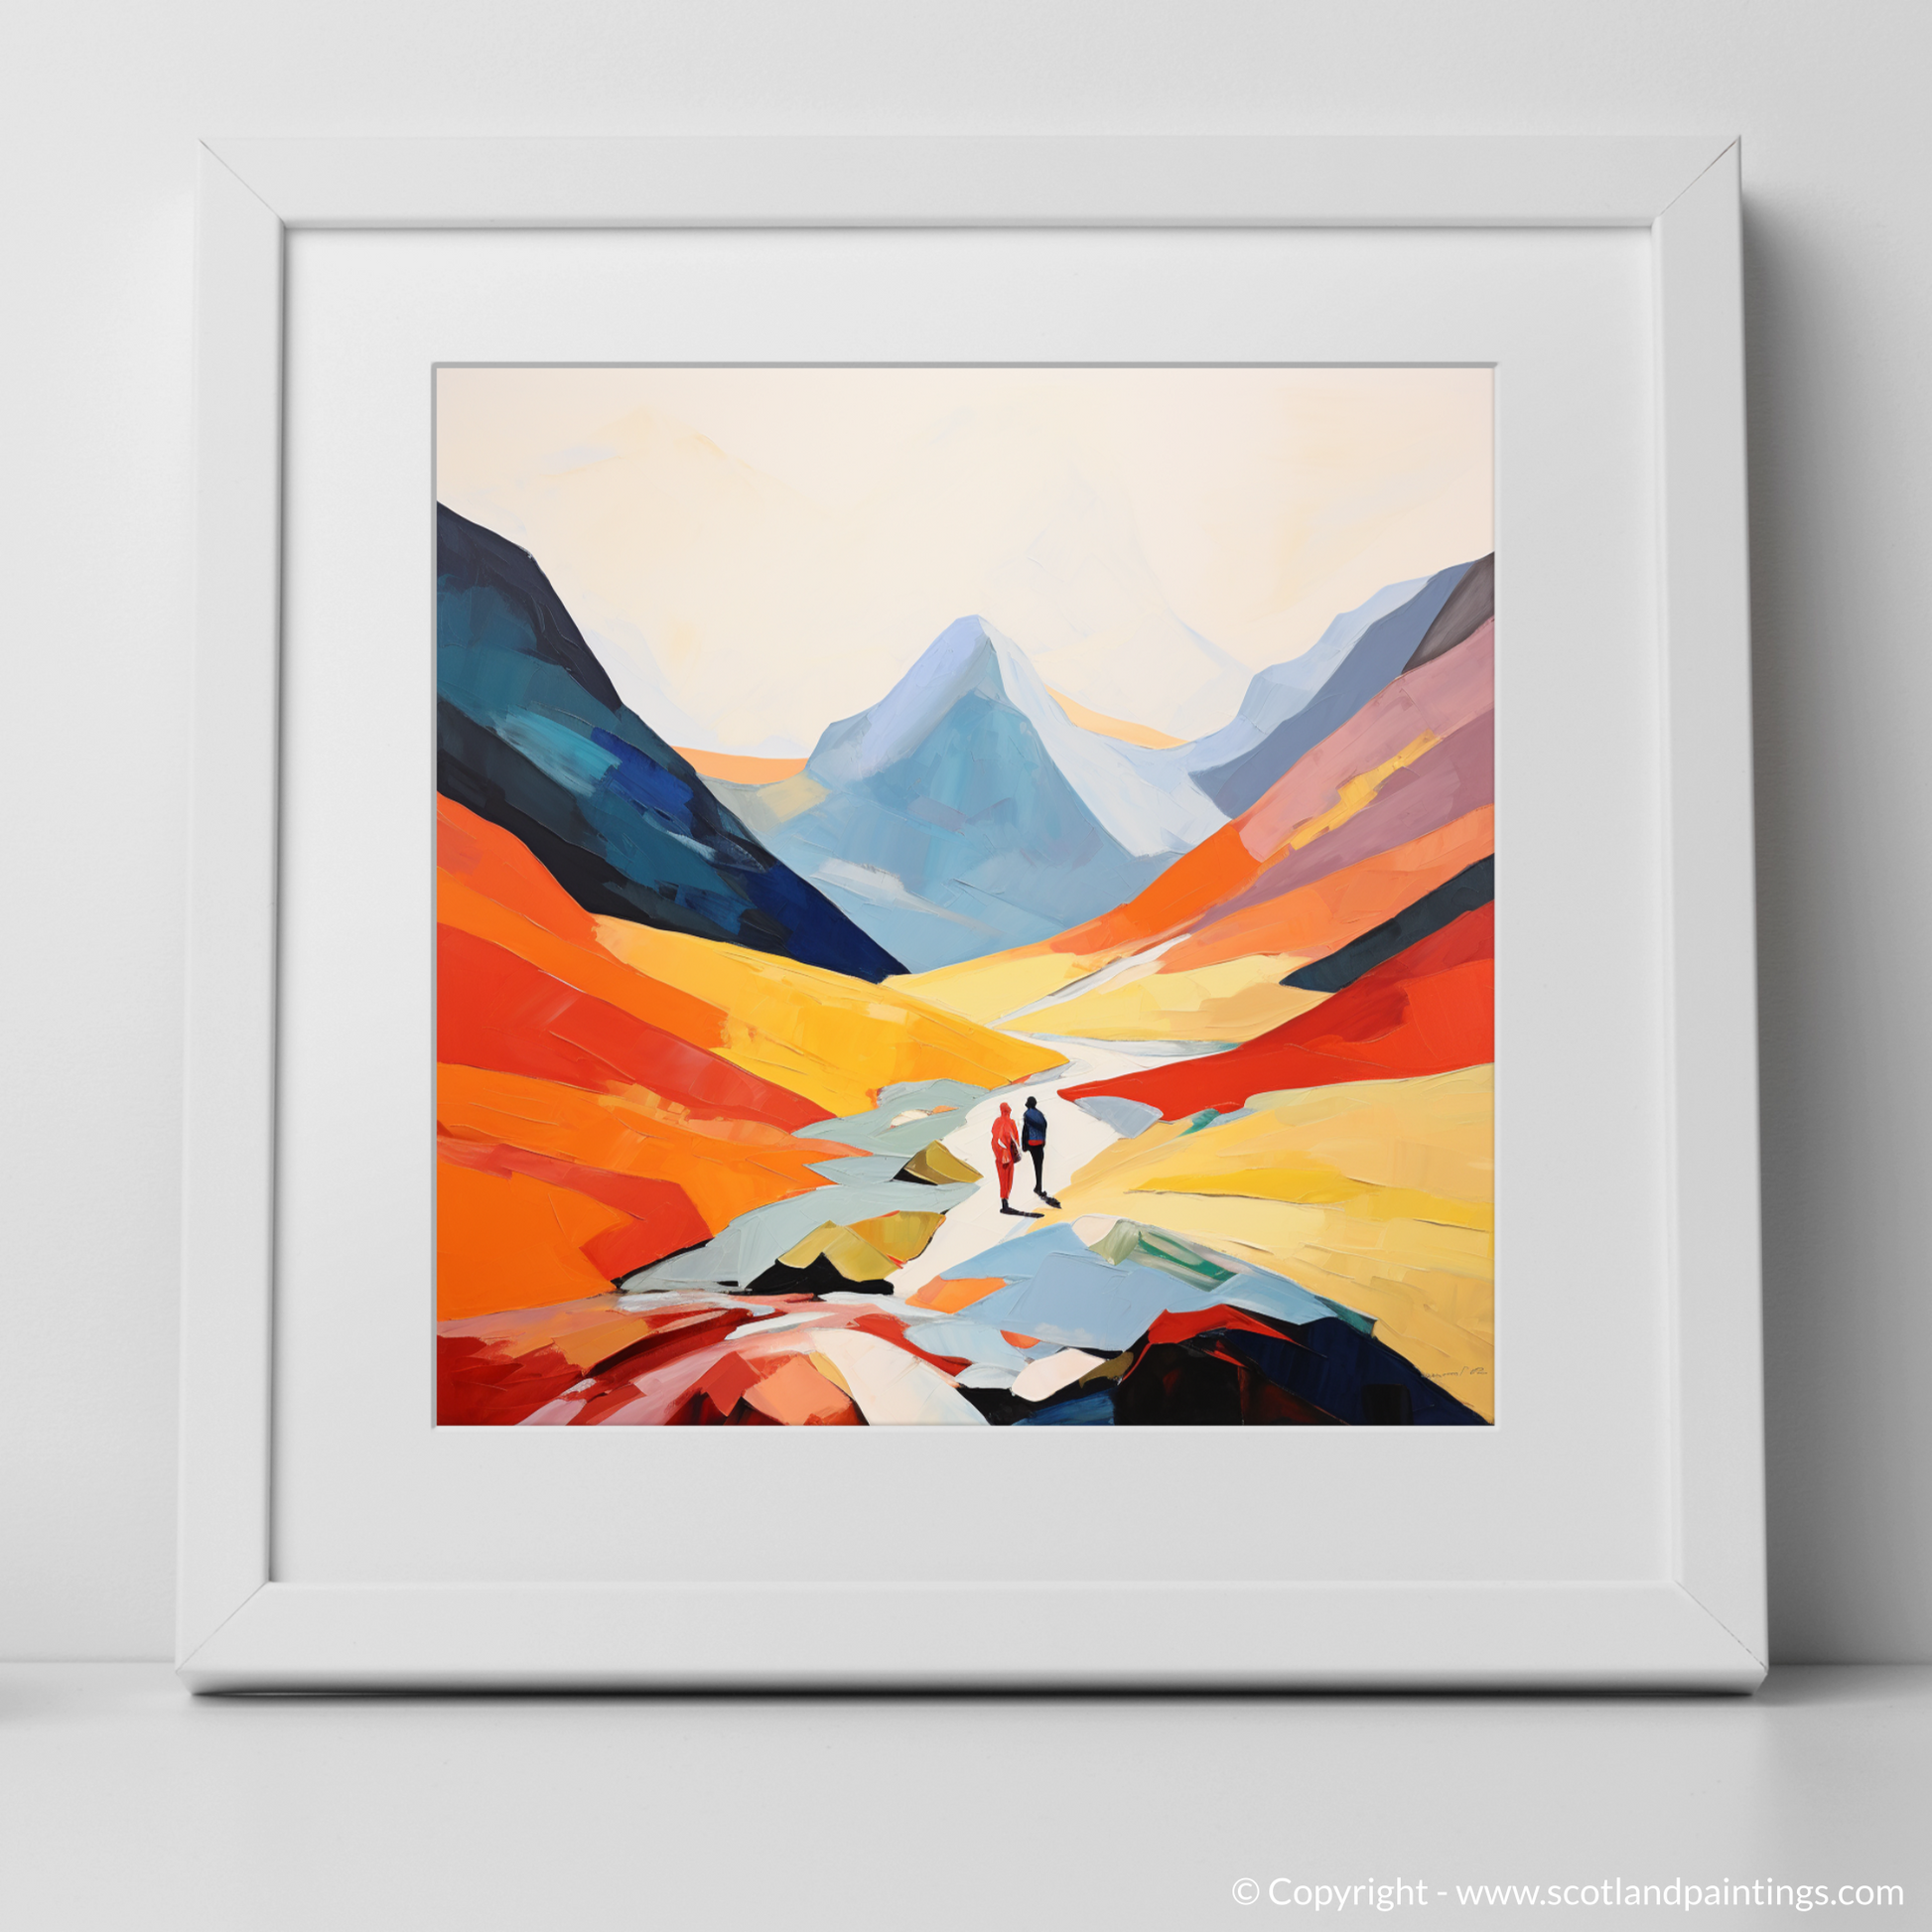 Art Print of Hikers in Glencoe with a white frame